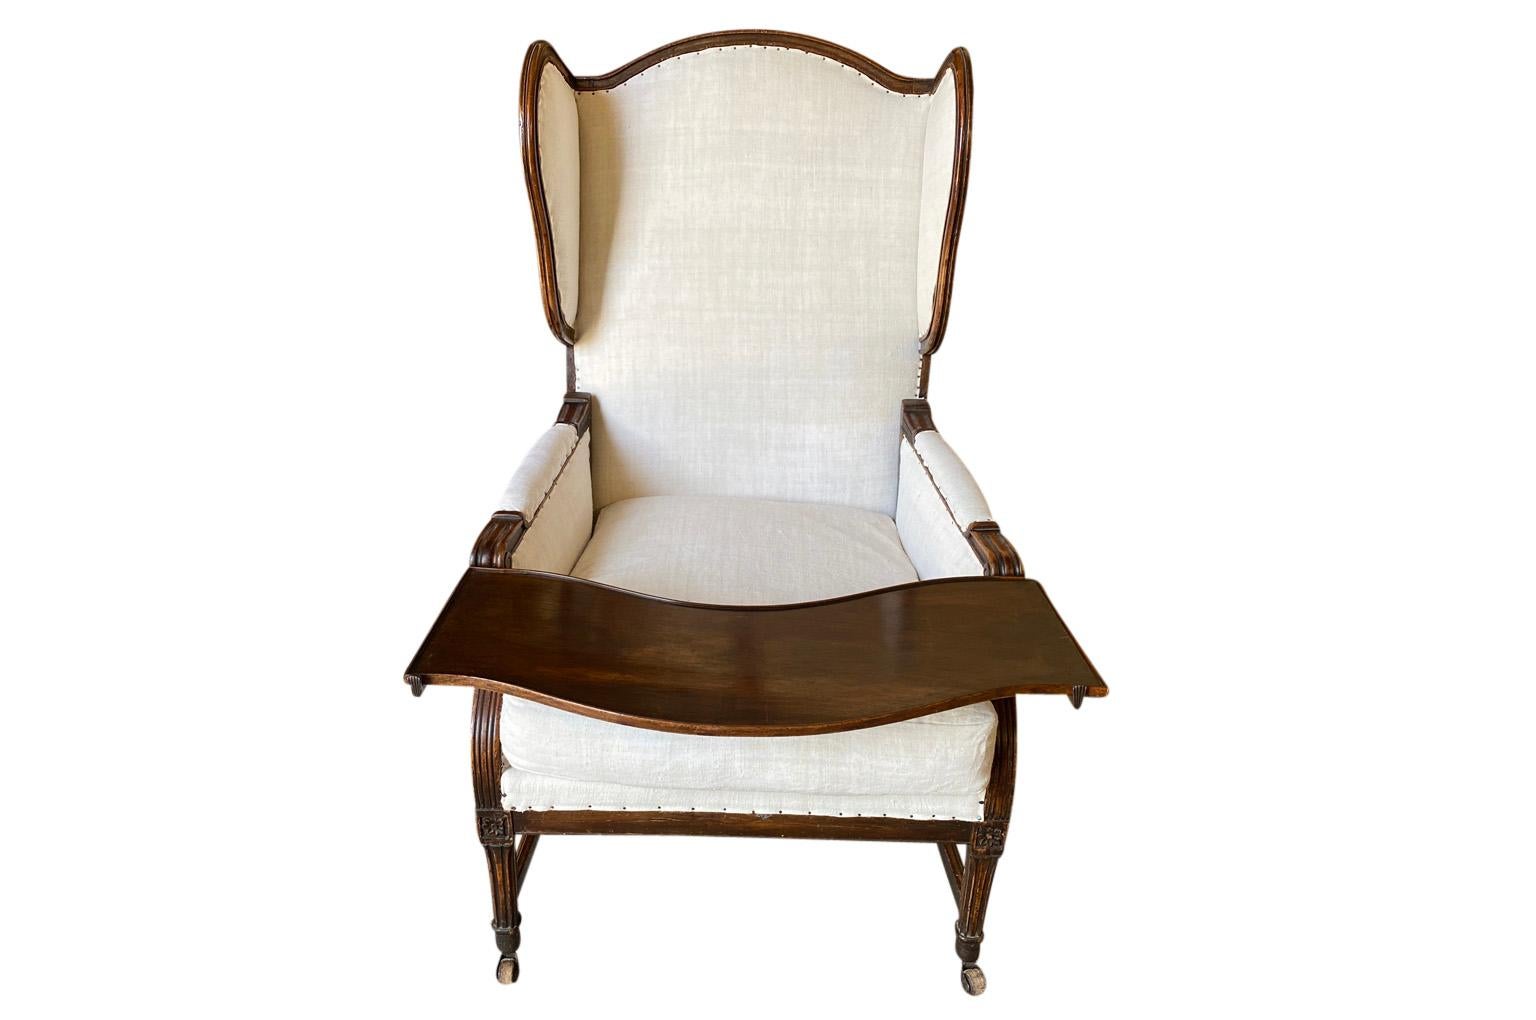 An outstanding 18th century Louis XVI period mechanical Chaise De Repos from Aix En Provence, France. Soundly crafted from walnut, this chair is constructed with the Cremaillere system - for reclining. There are also iron pullouts recessed in the